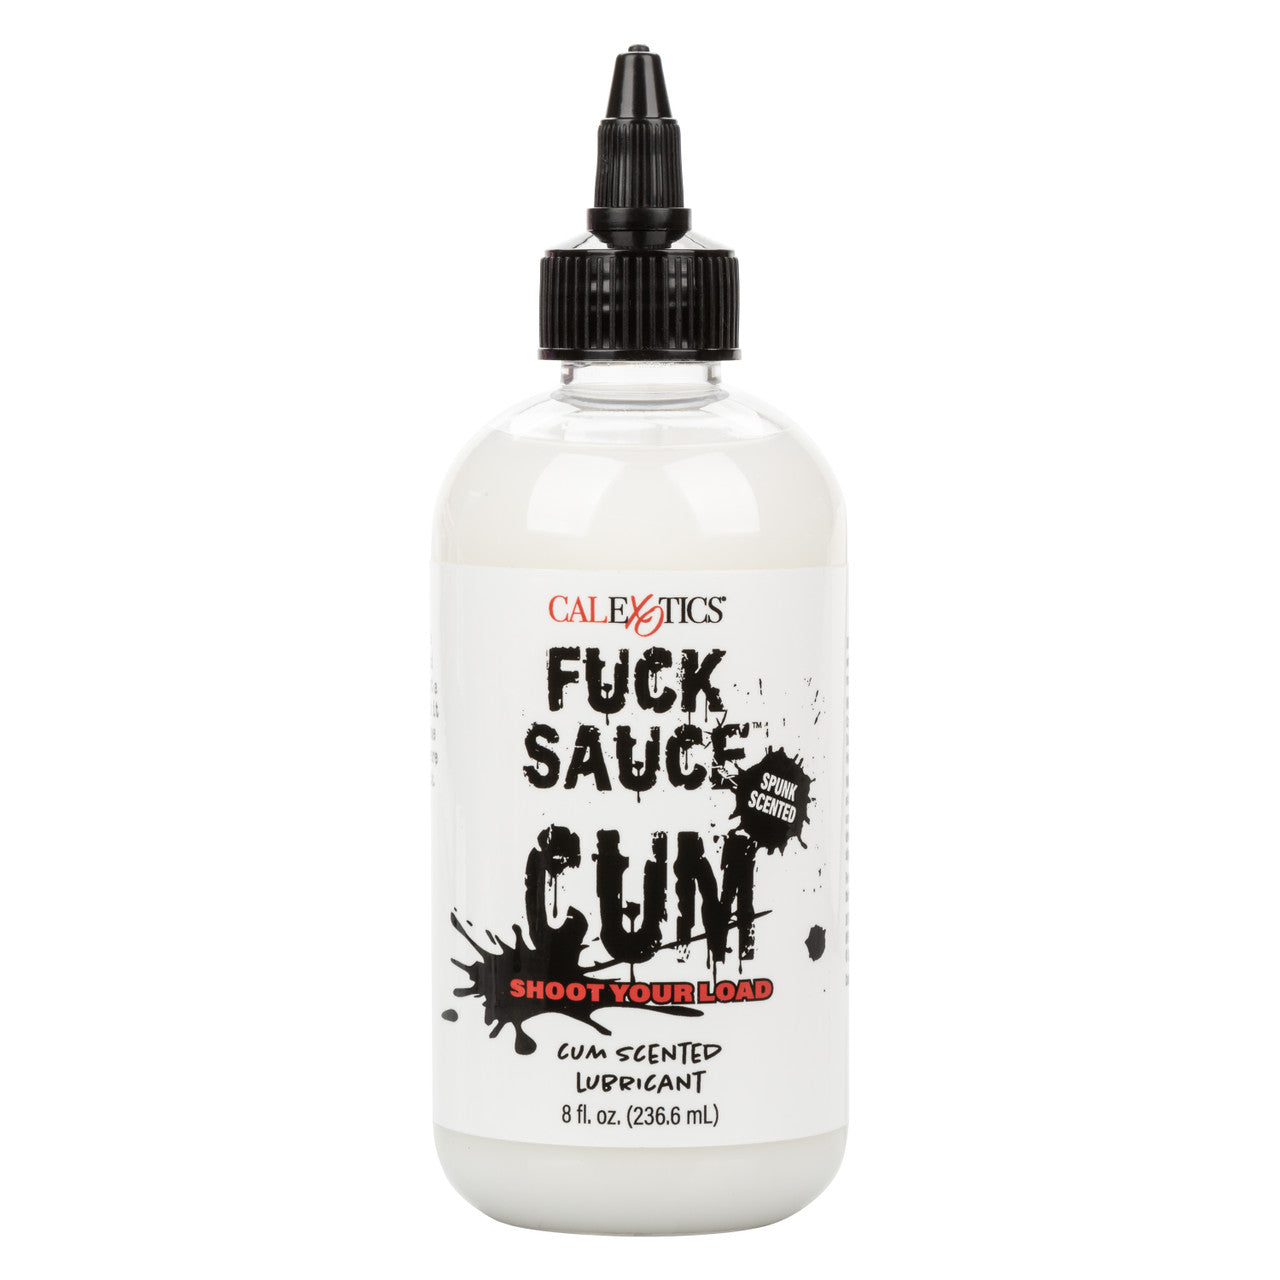 Fuck Sauce Cum Scented Personal Lubricant - 8 fl. oz. - Thorn & Feather